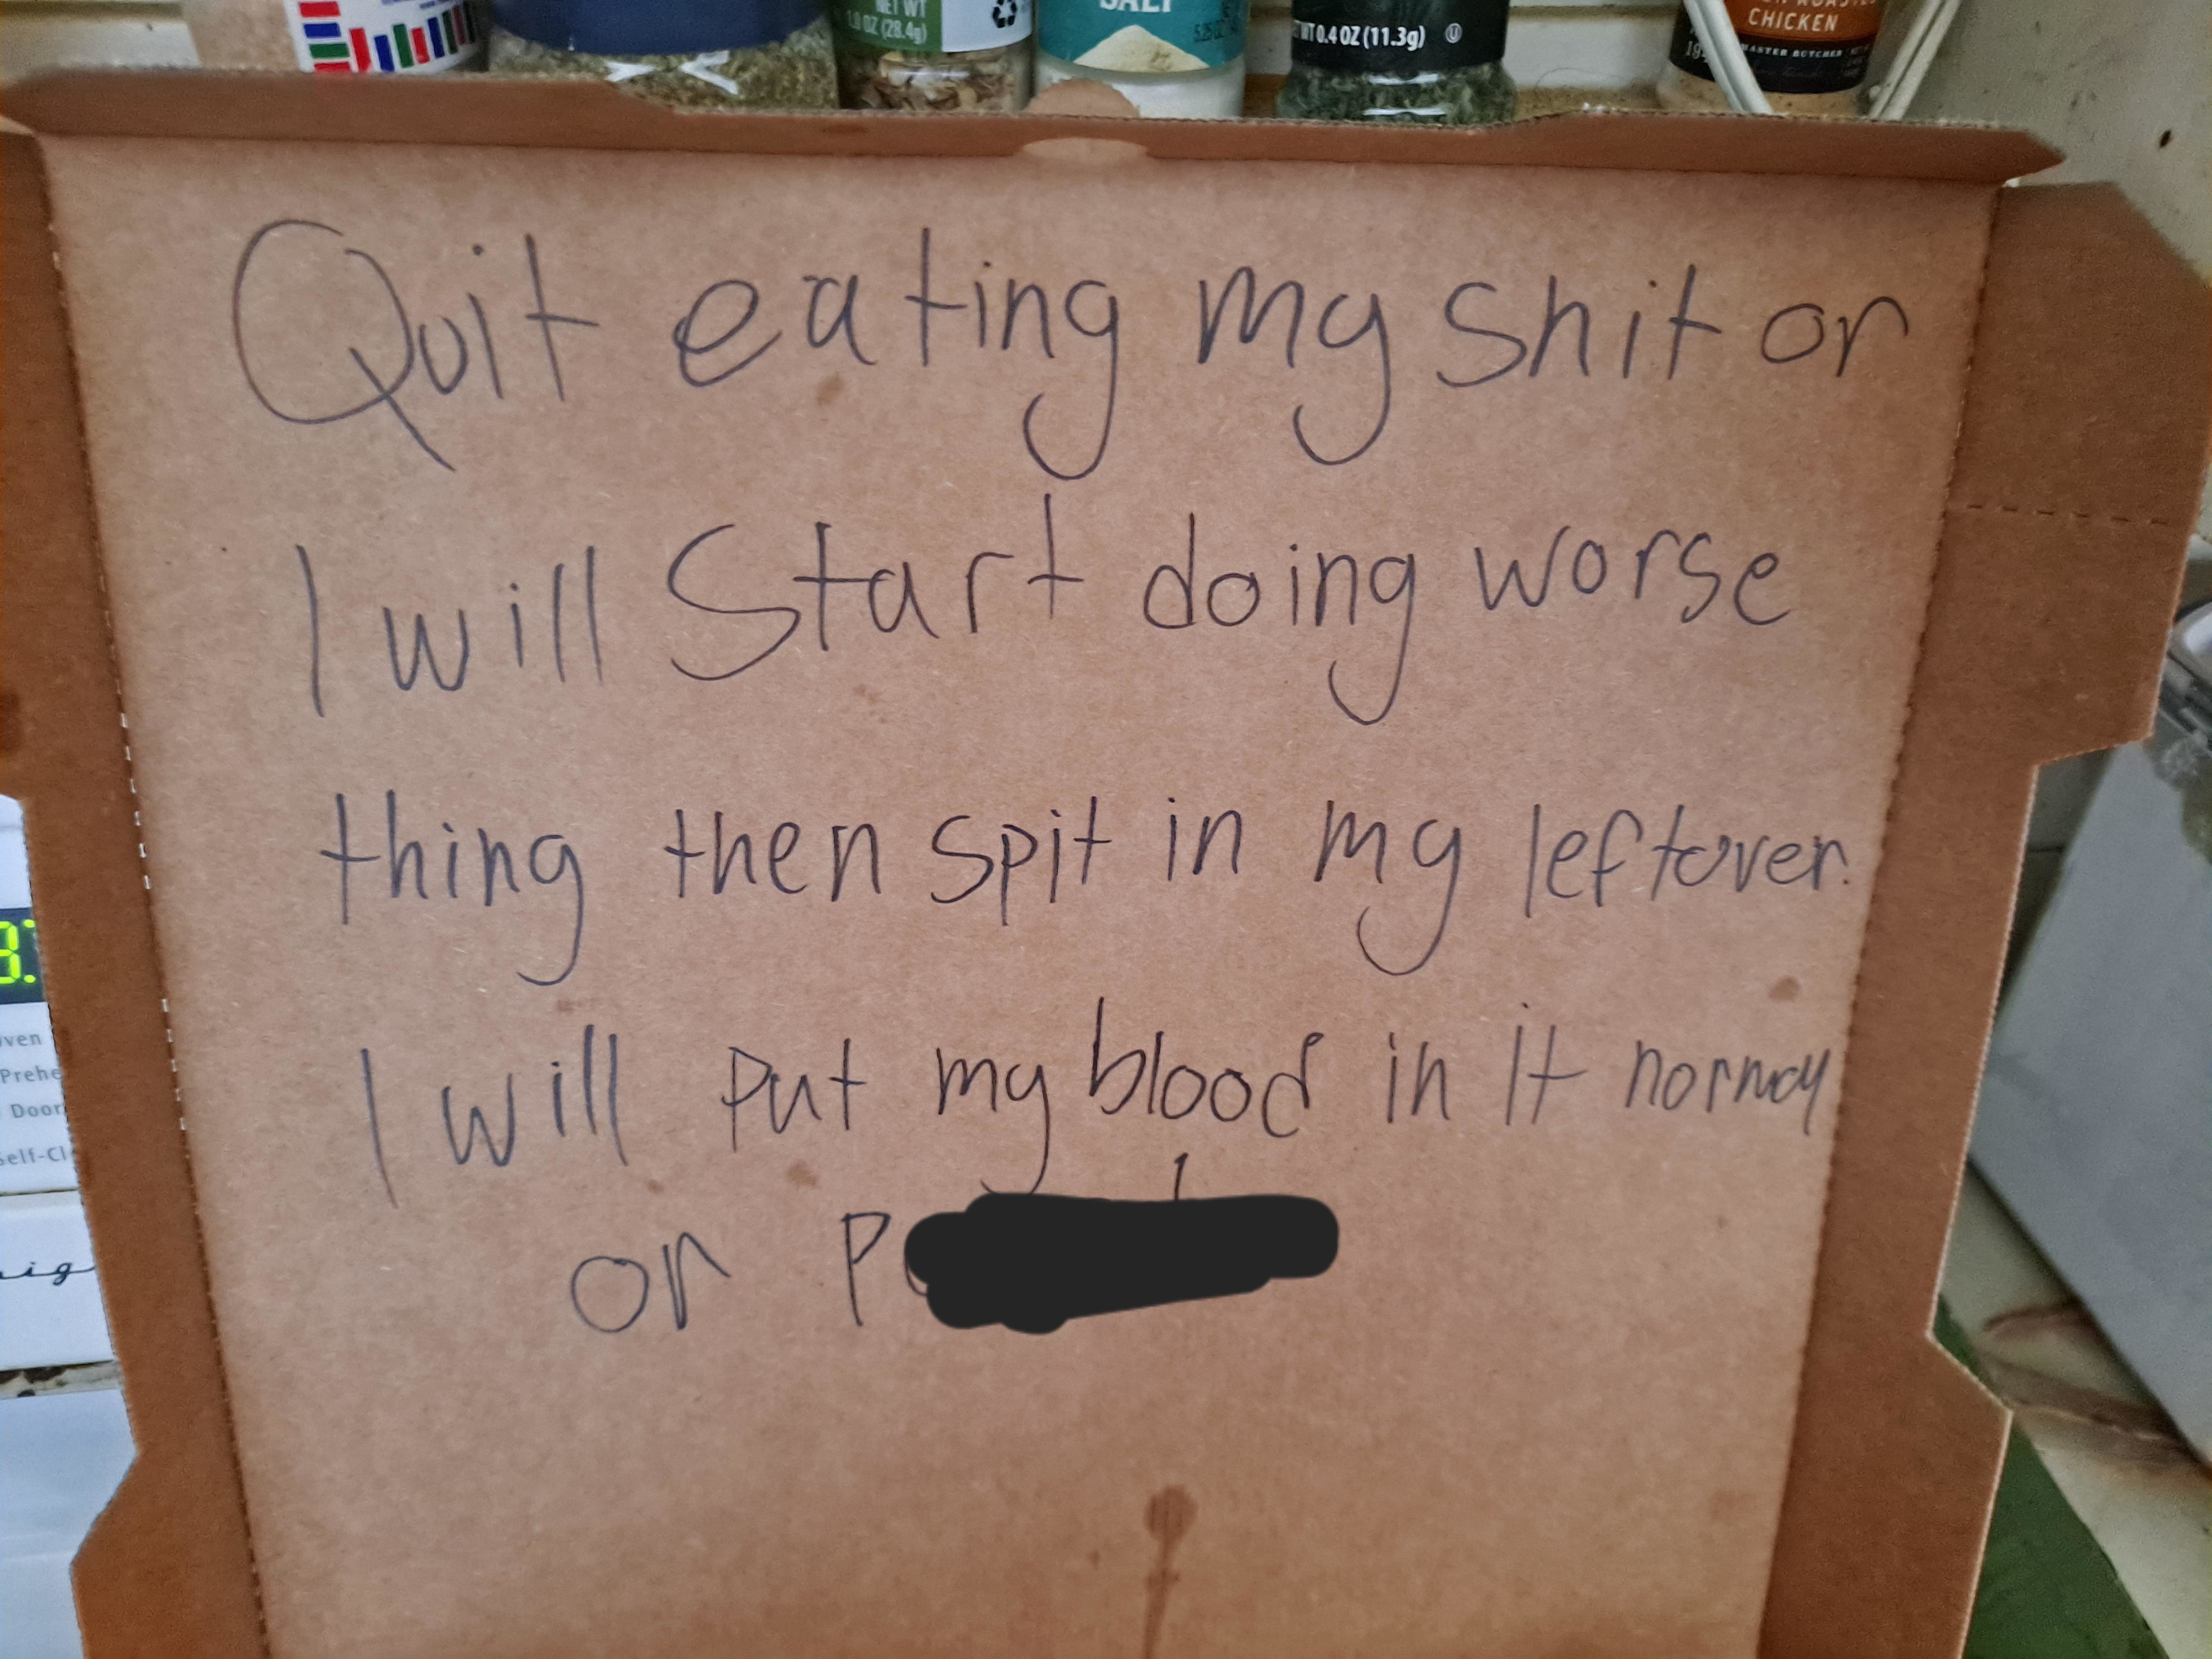 Handwritten note on cardboard with a threatening message about tampering with food